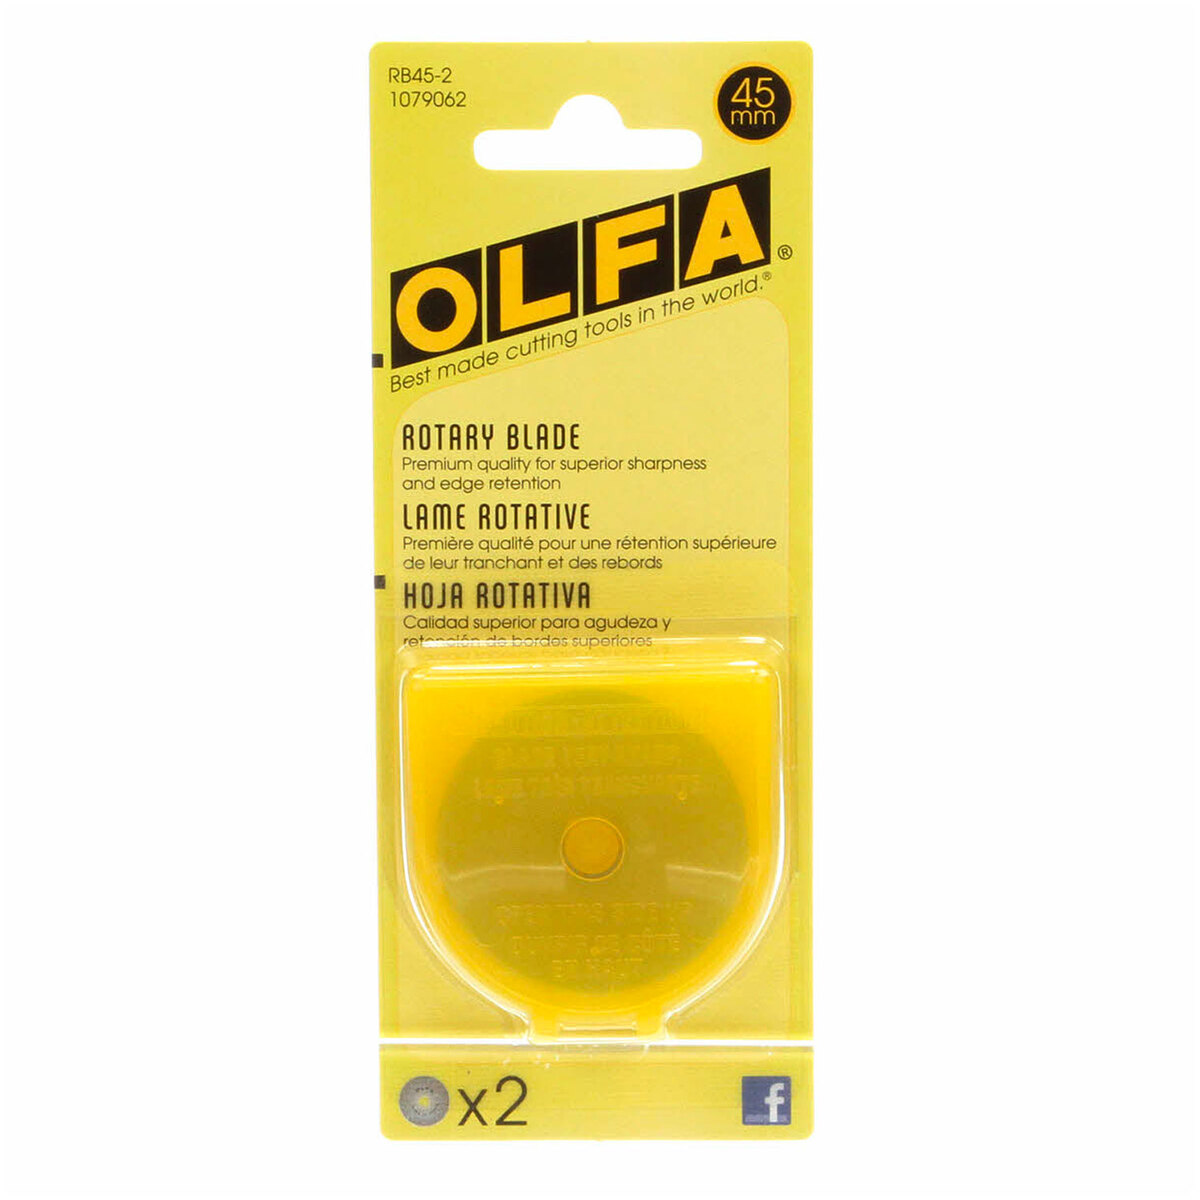 OLFA 45mm Rotary Cutter Replacement Blades, 2 Blades (RB45-2) - Tungsten  Steel Circular Rotary Fabric Cutter Blade for Crafts, Sewing, Quilting